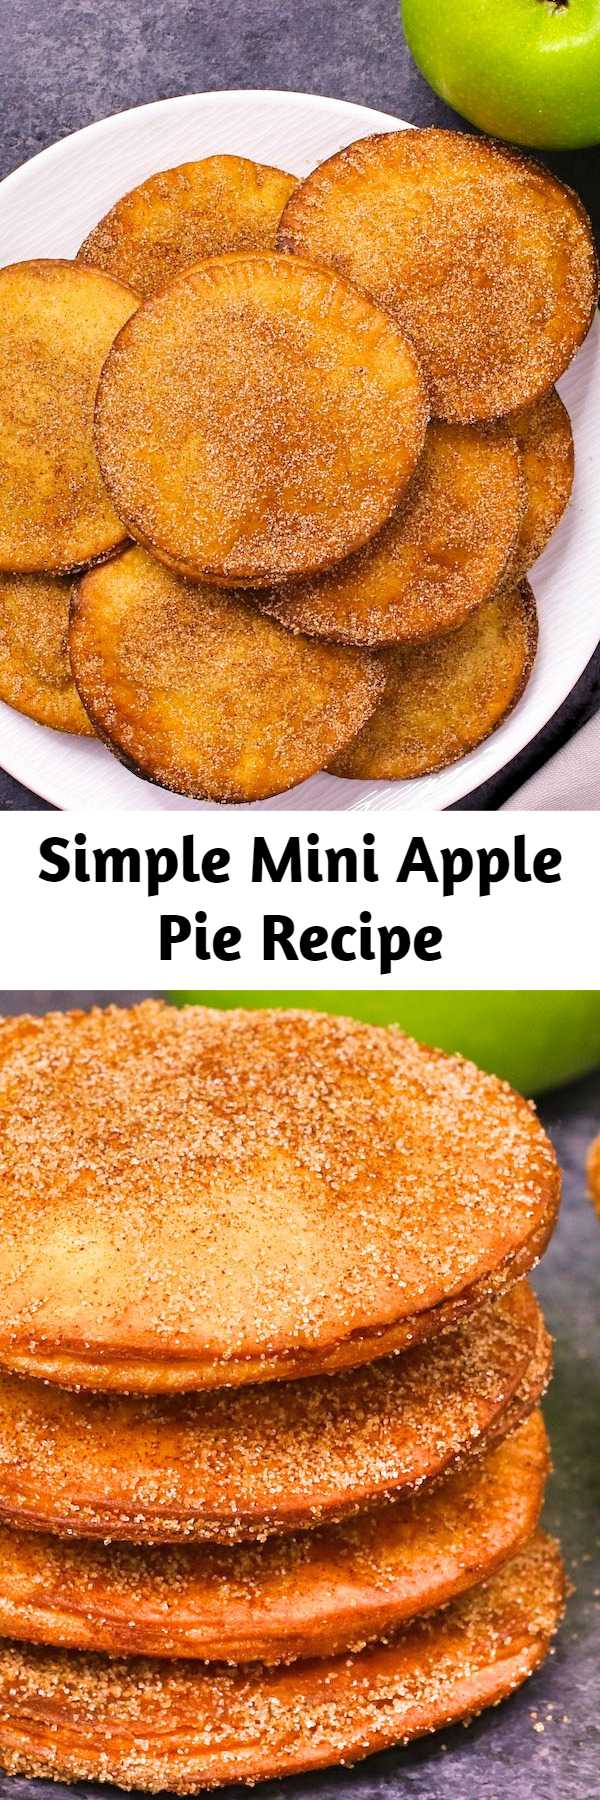 Simple Mini Apple Pie Recipe - Mini Apple Pies have sweet and soft filing with crispy pie on the outside. It’s simple to make and takes less than 20 minutes. It’s one of my favorite dessert recipes.